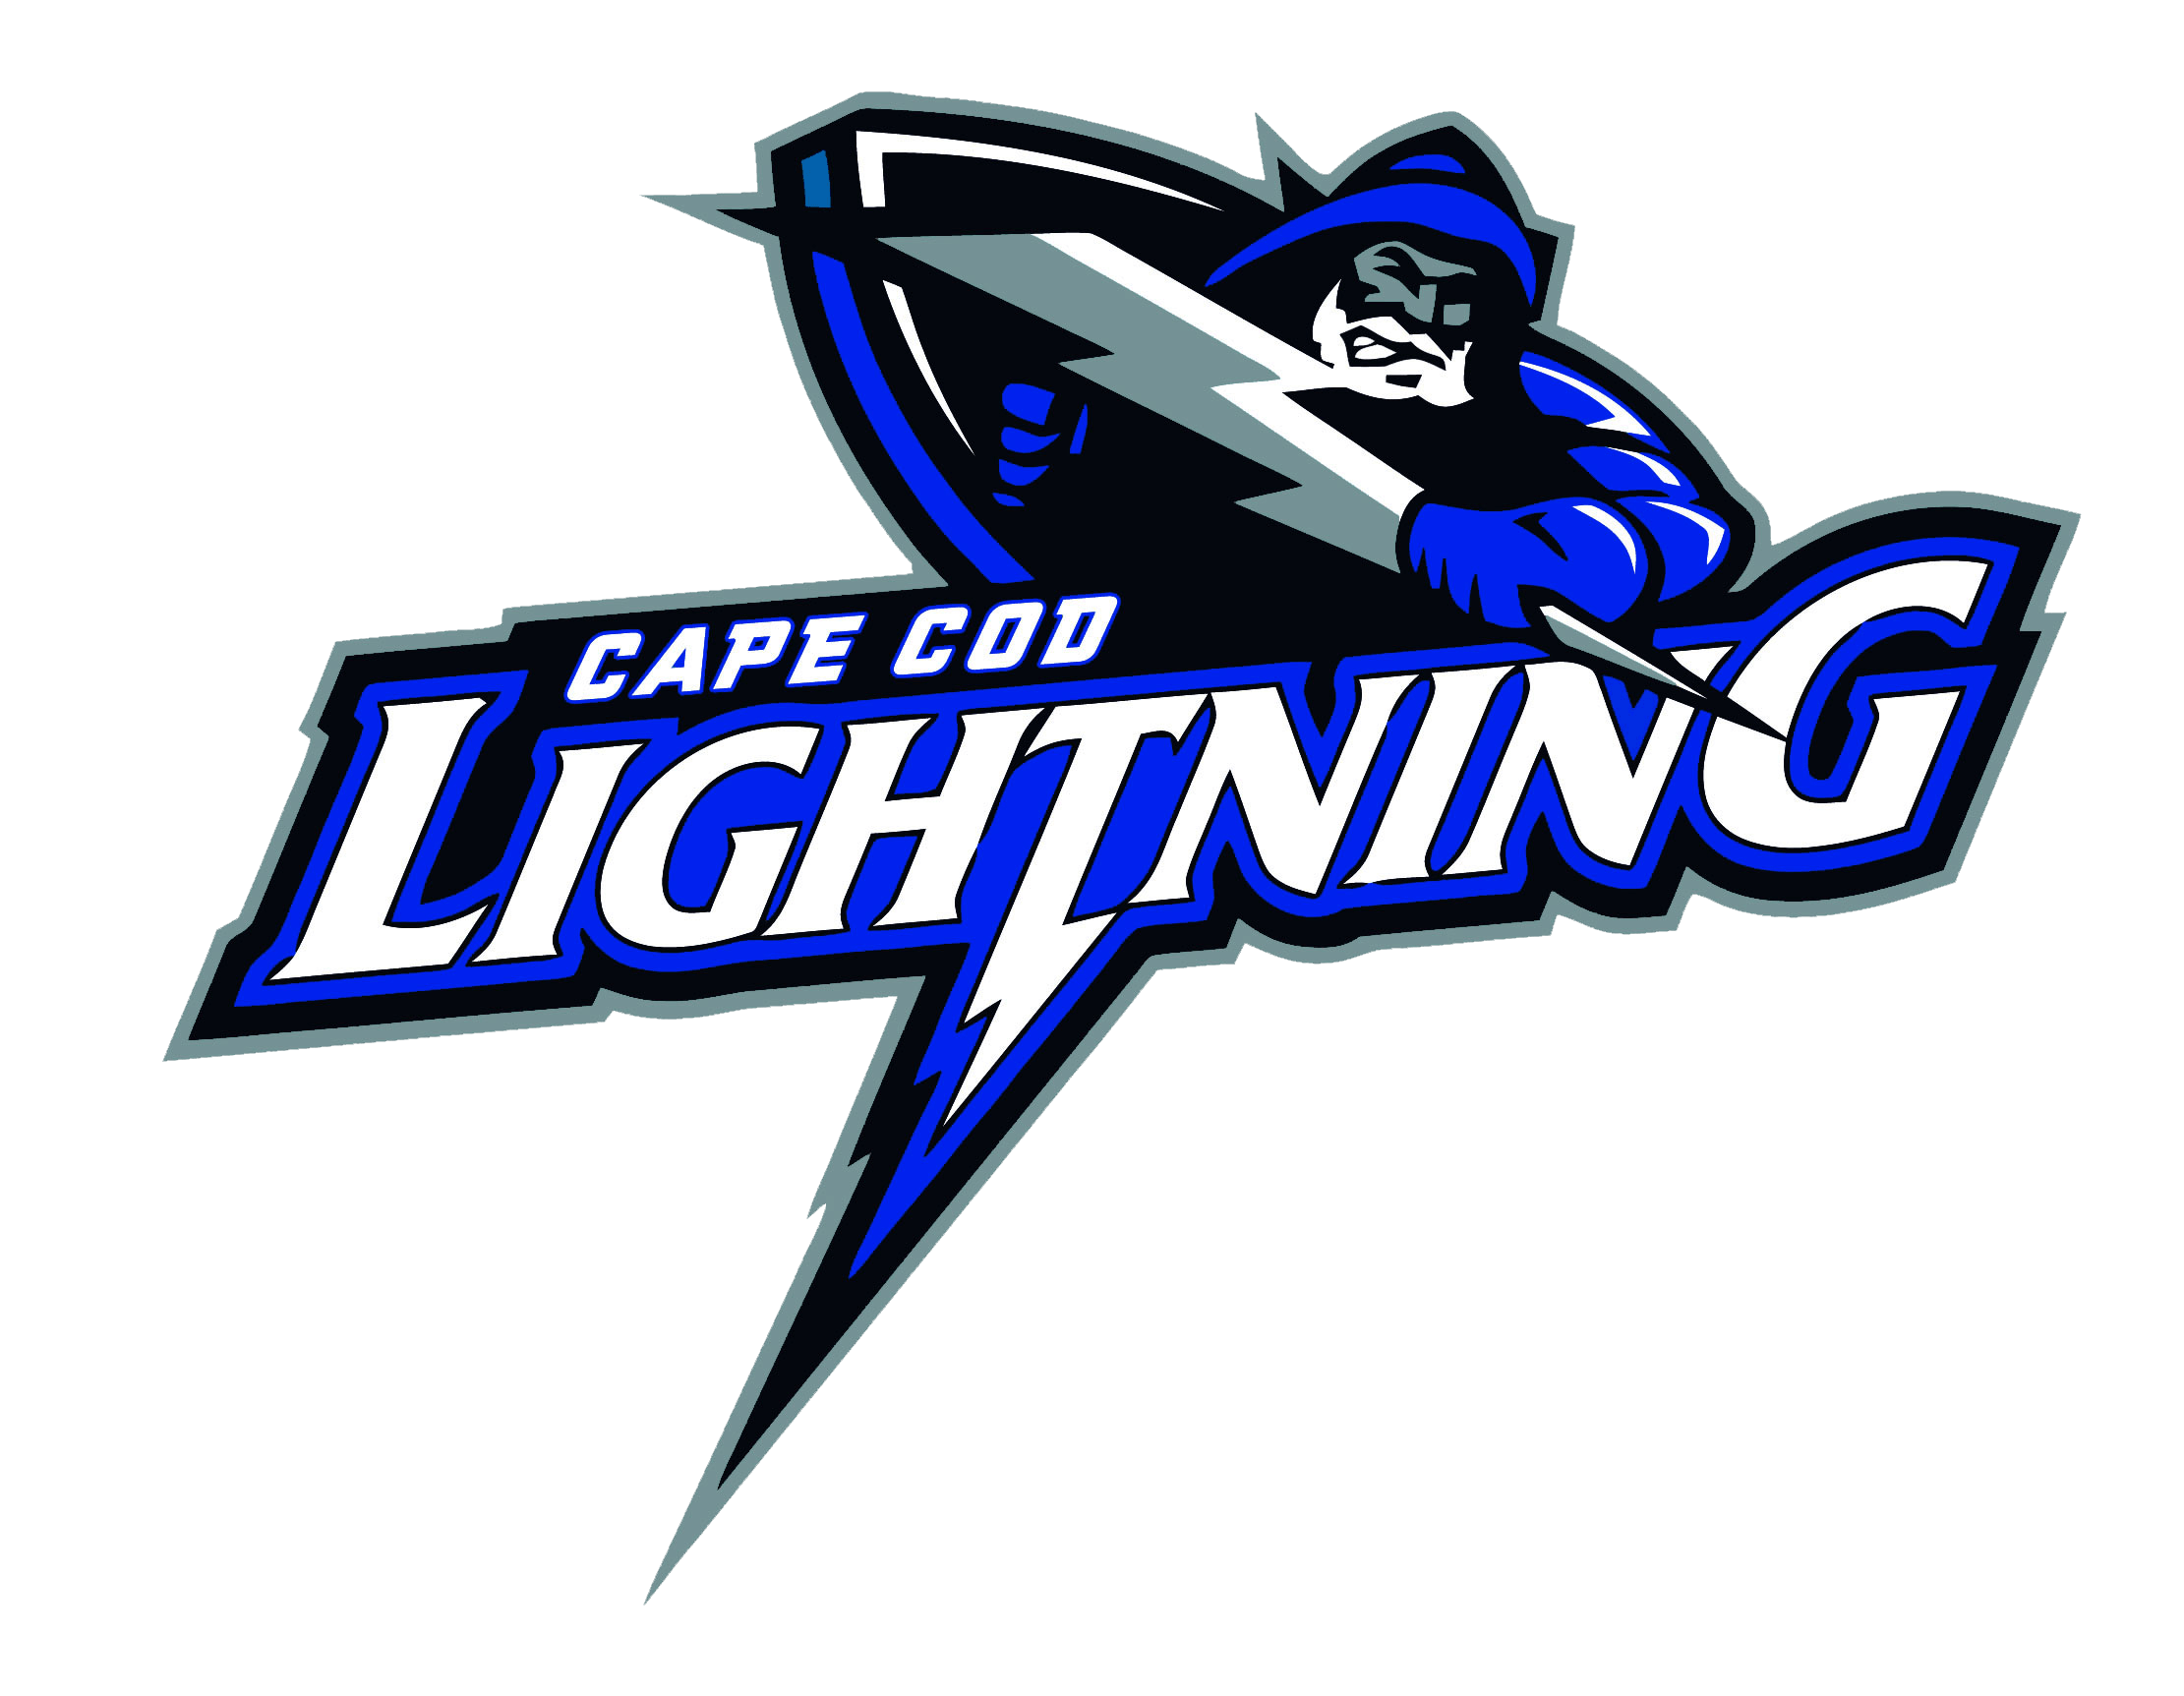 CC Lightning Logo - Our Mission | Falmouth Youth Hockey League